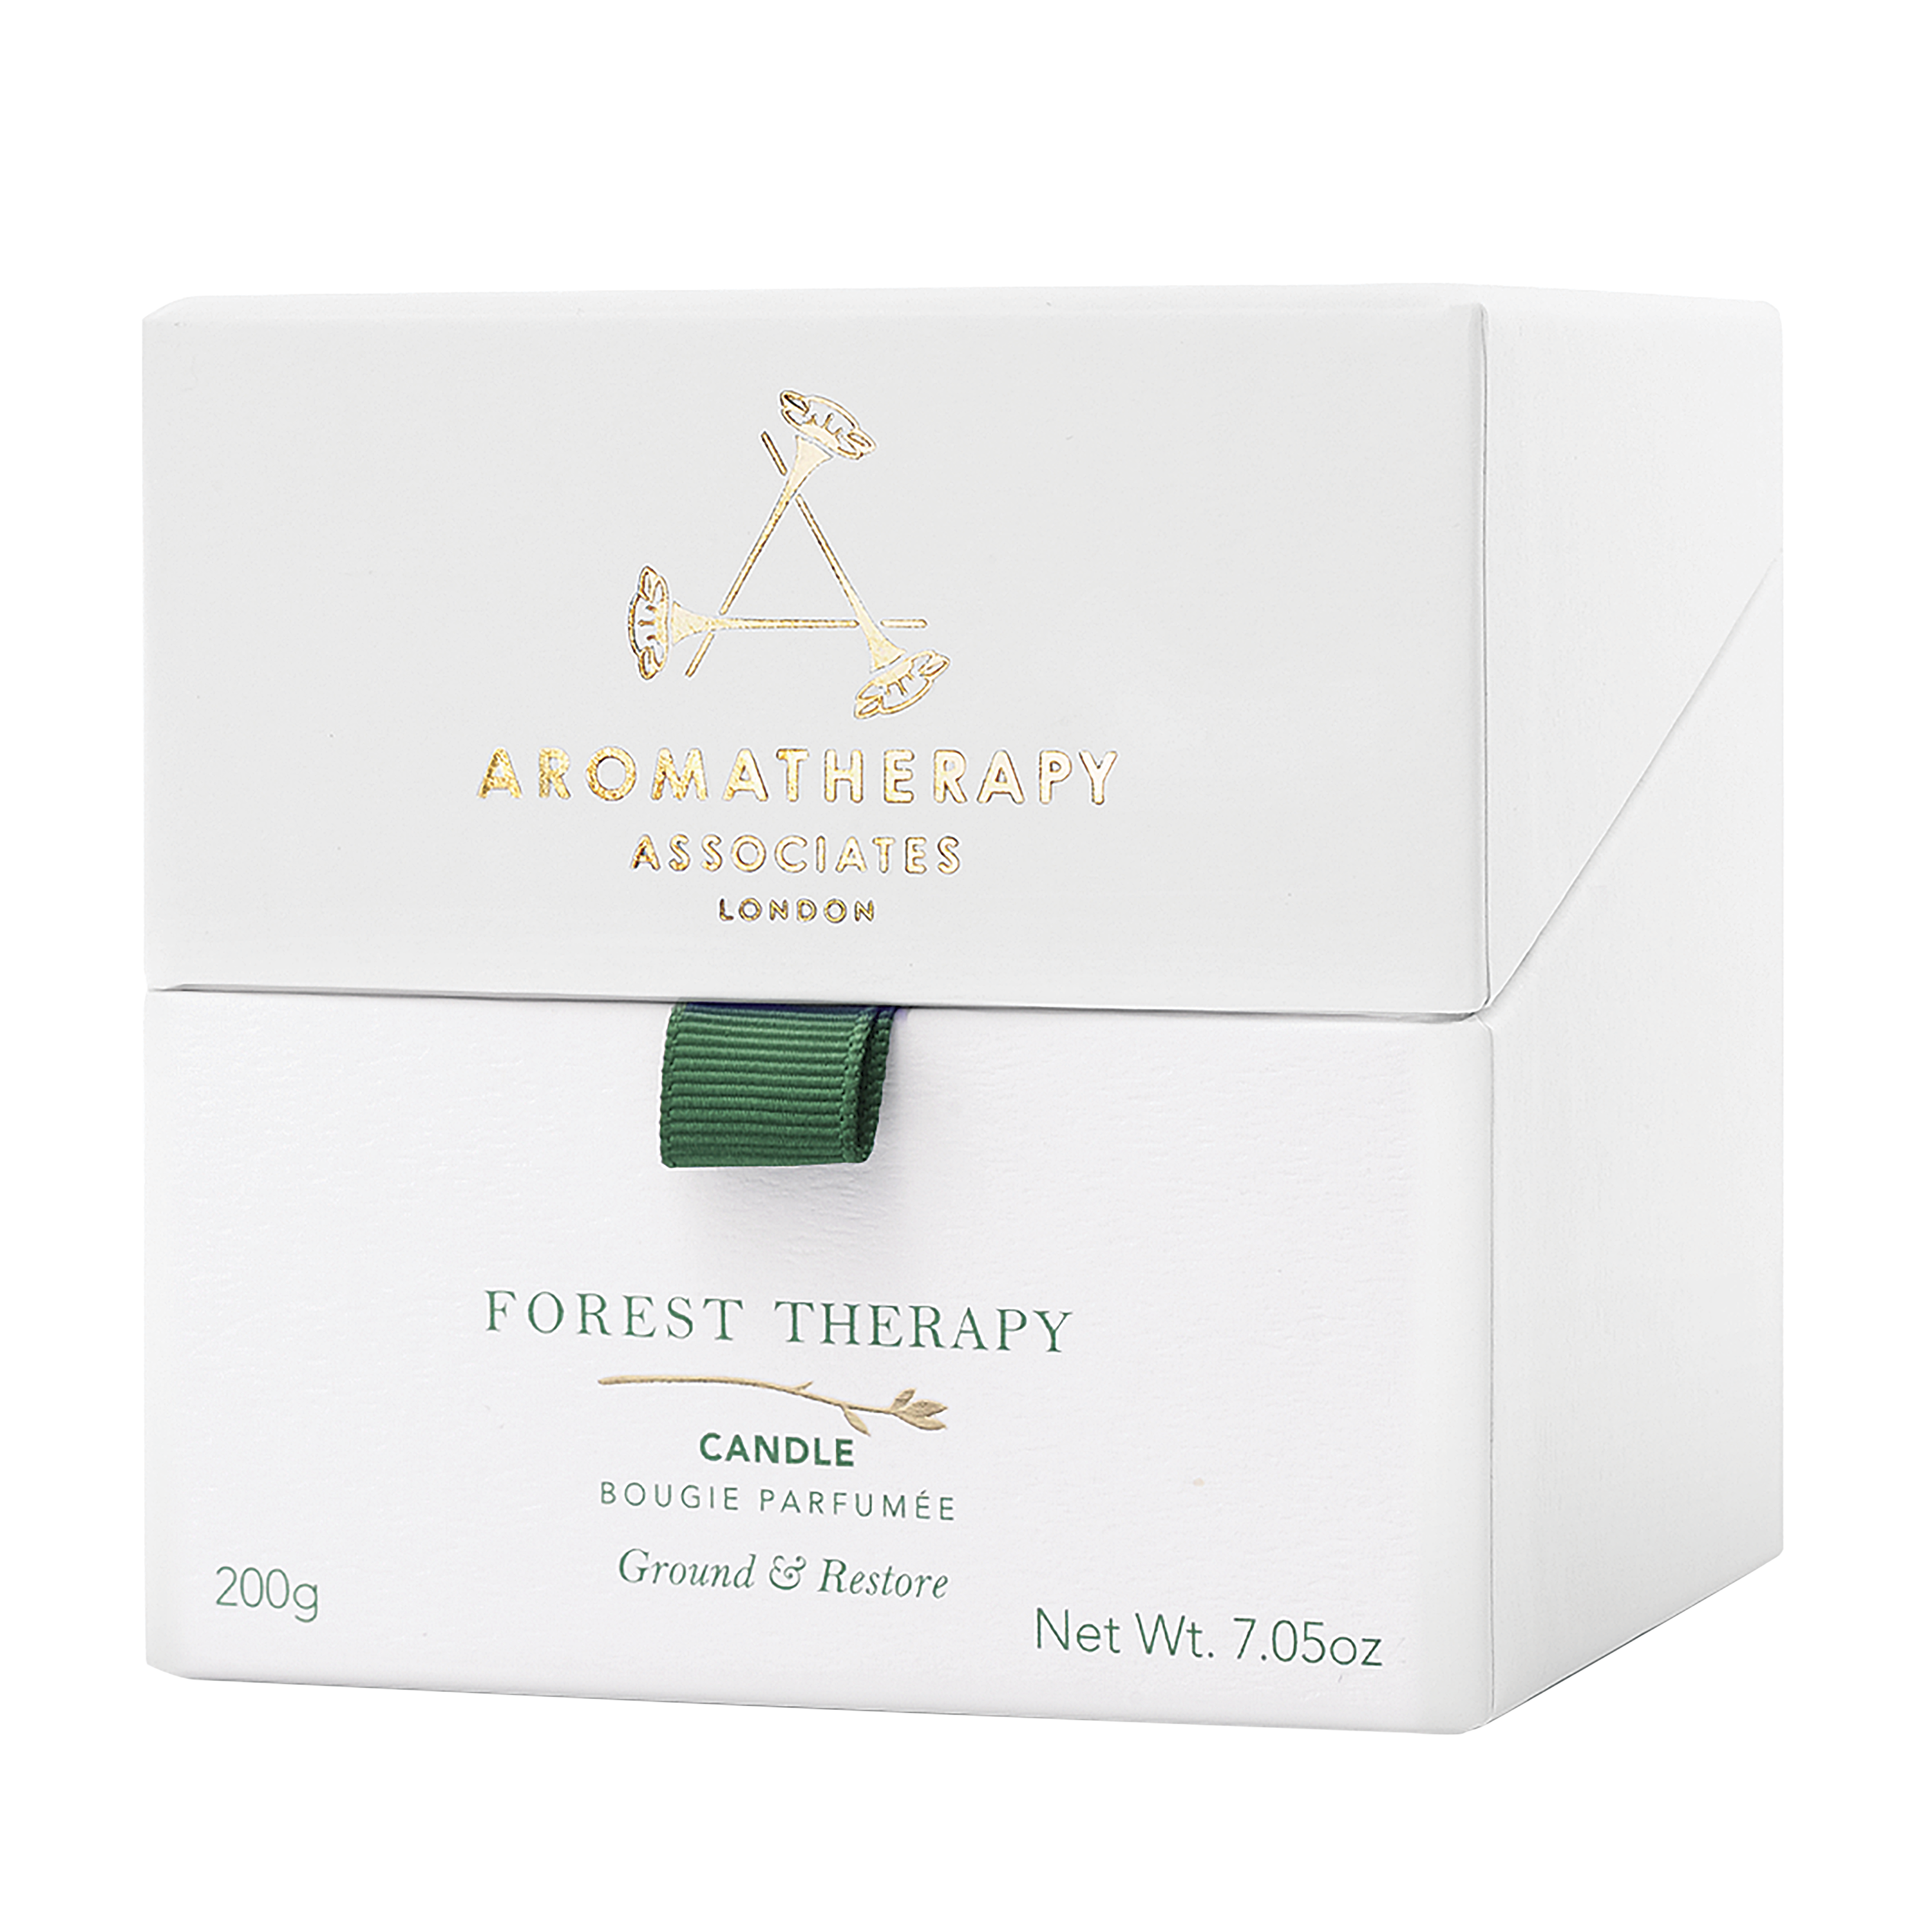 Forest Therapy Candle 200g Aromatherapy Associates